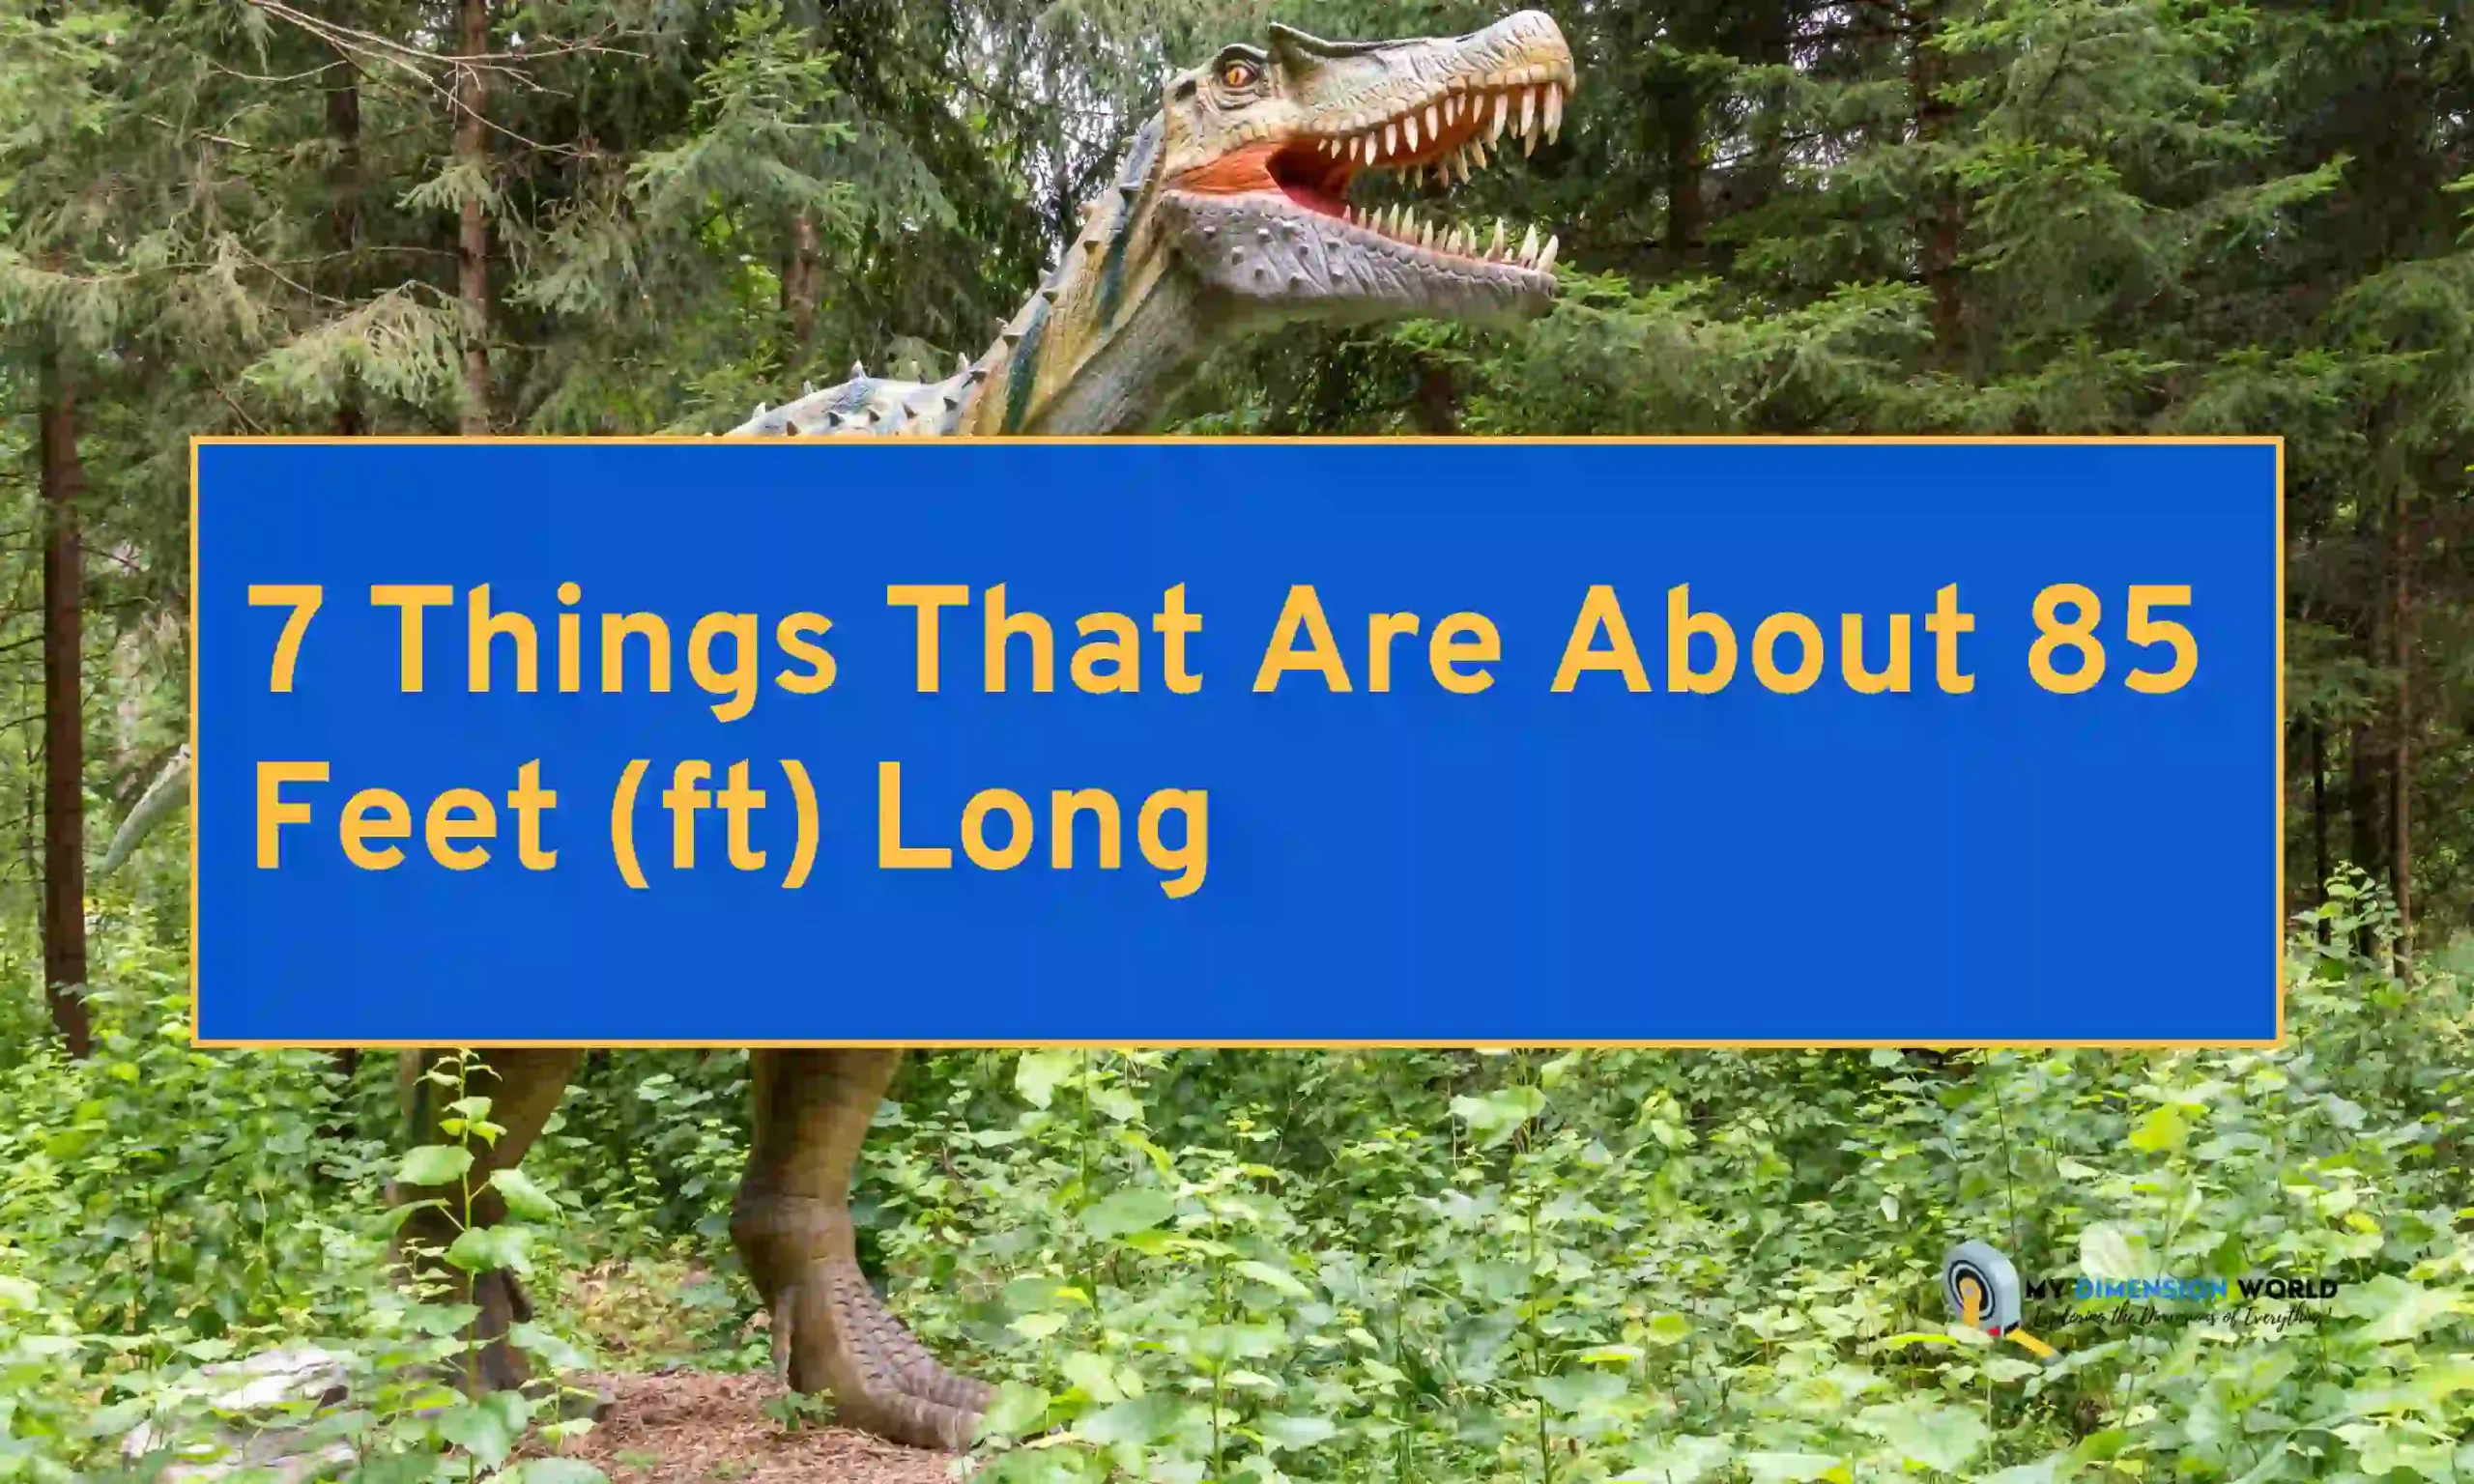 7 Things That Are About 85 Feet (ft) Long